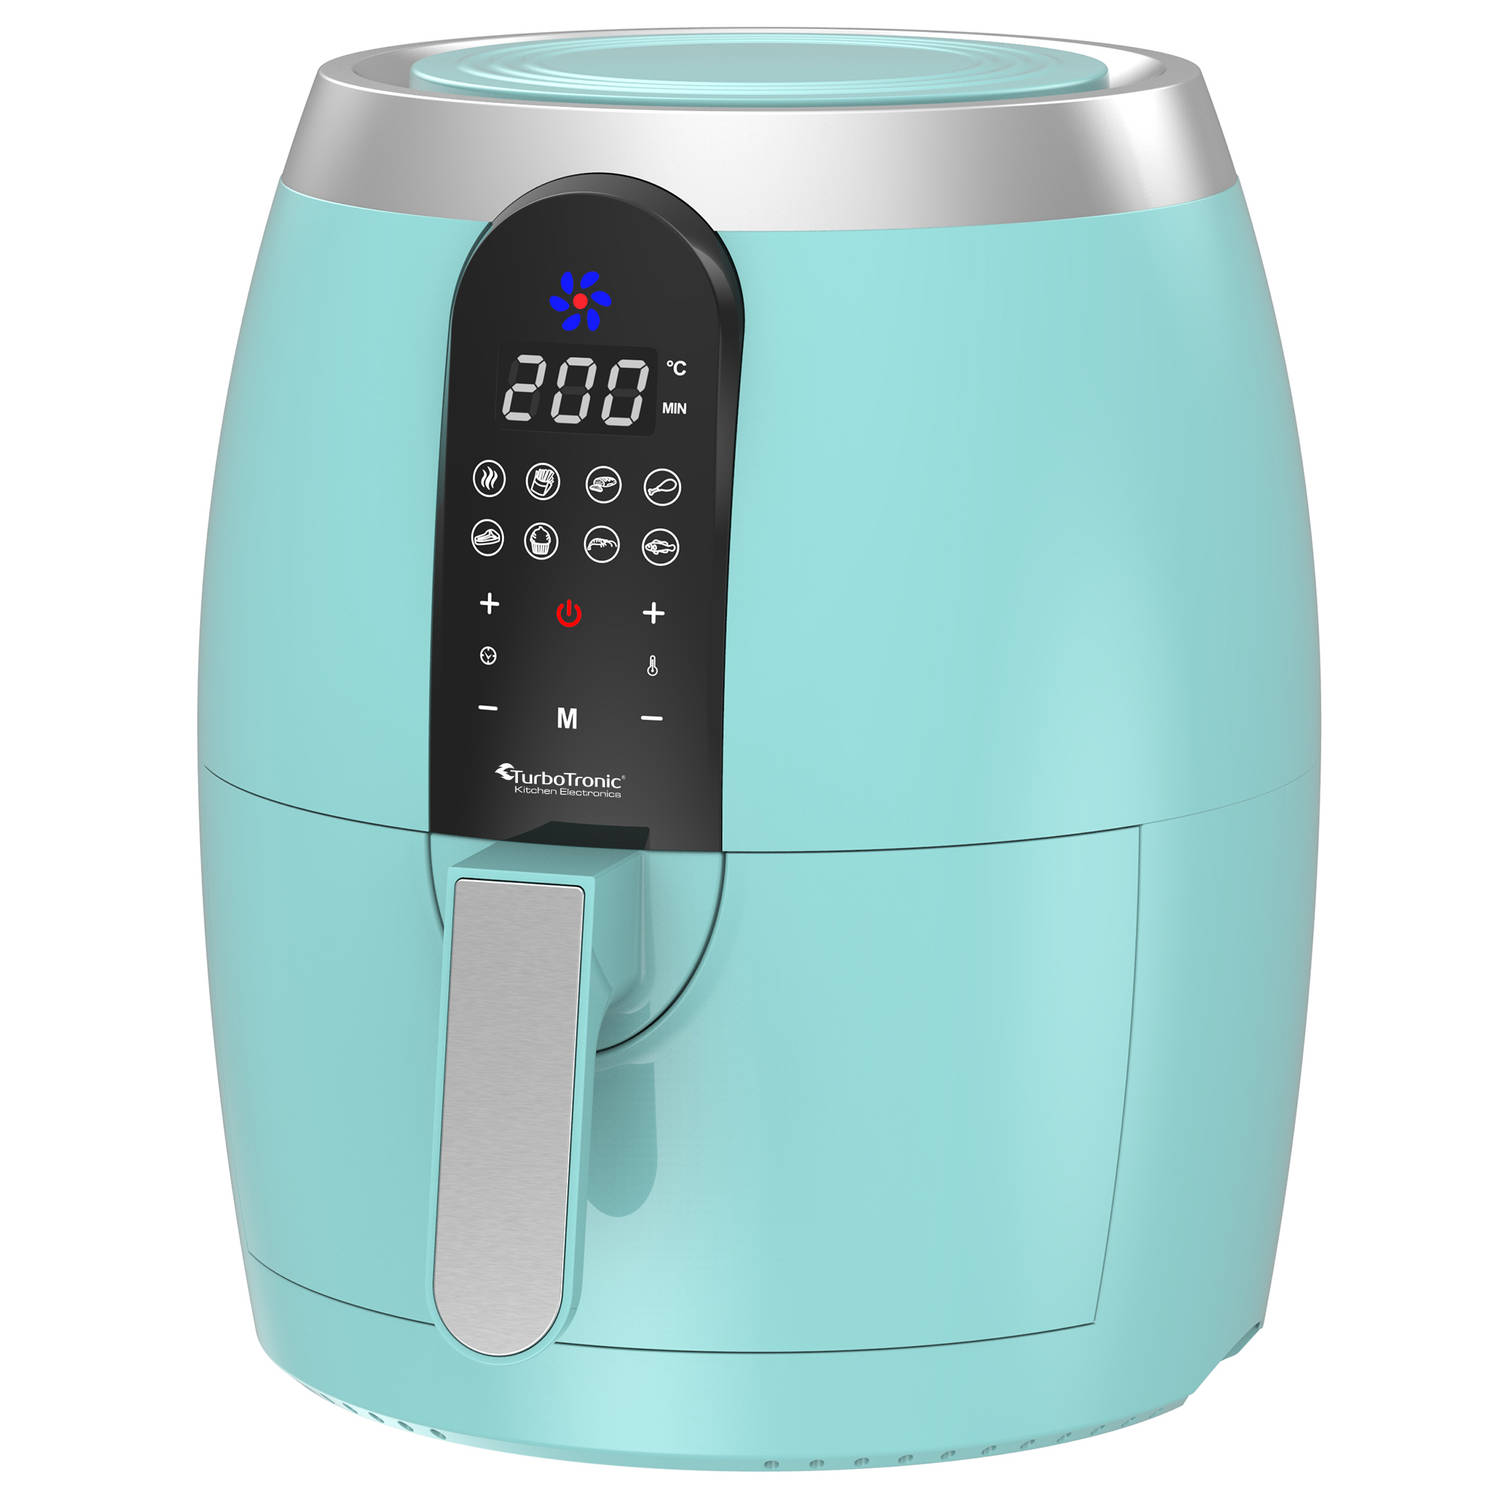 Turbotronic Af10d Digitale Airfryer Heteluchtfriteuse 3.5l Turquoise